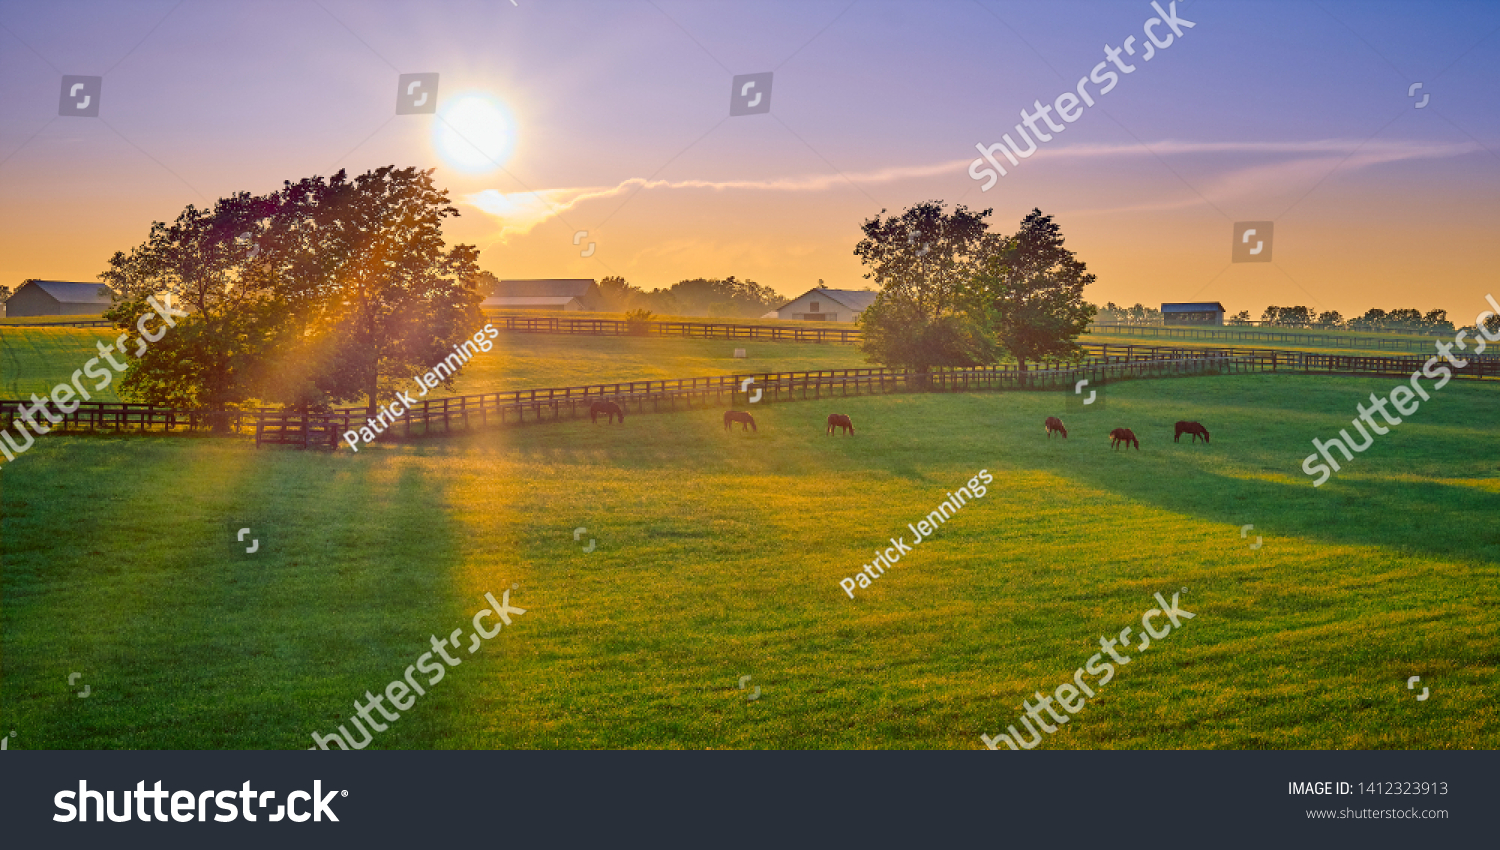 Thoroughbred horses grazing at sunset in a field. #1412323913